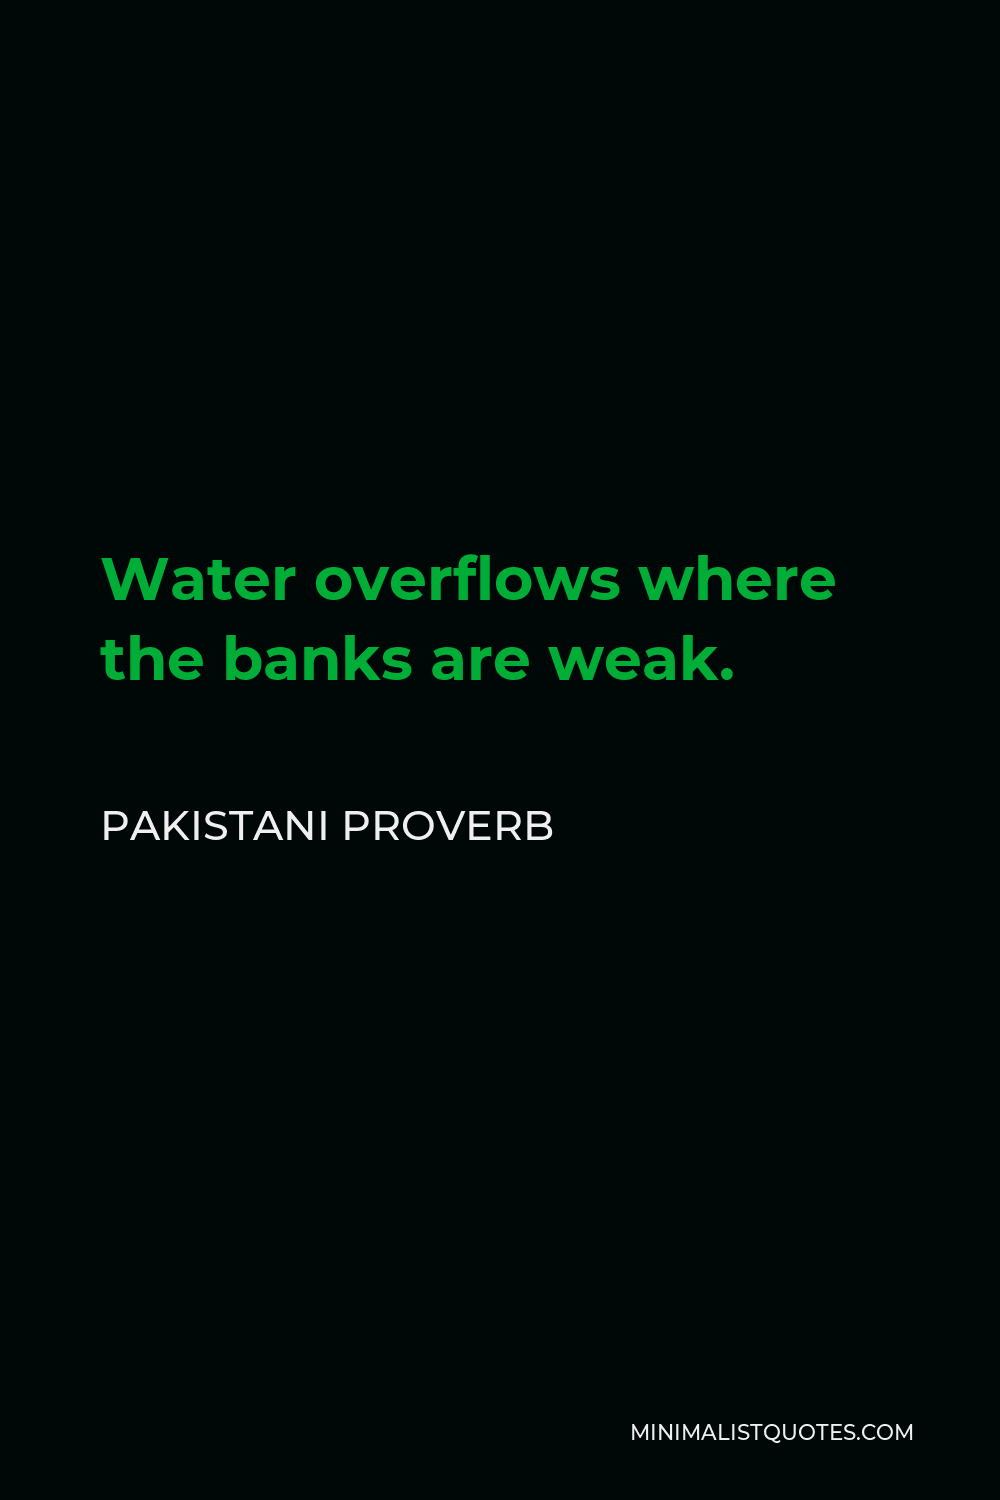 Pakistani Proverb Quote - Water overflows where the banks are weak.